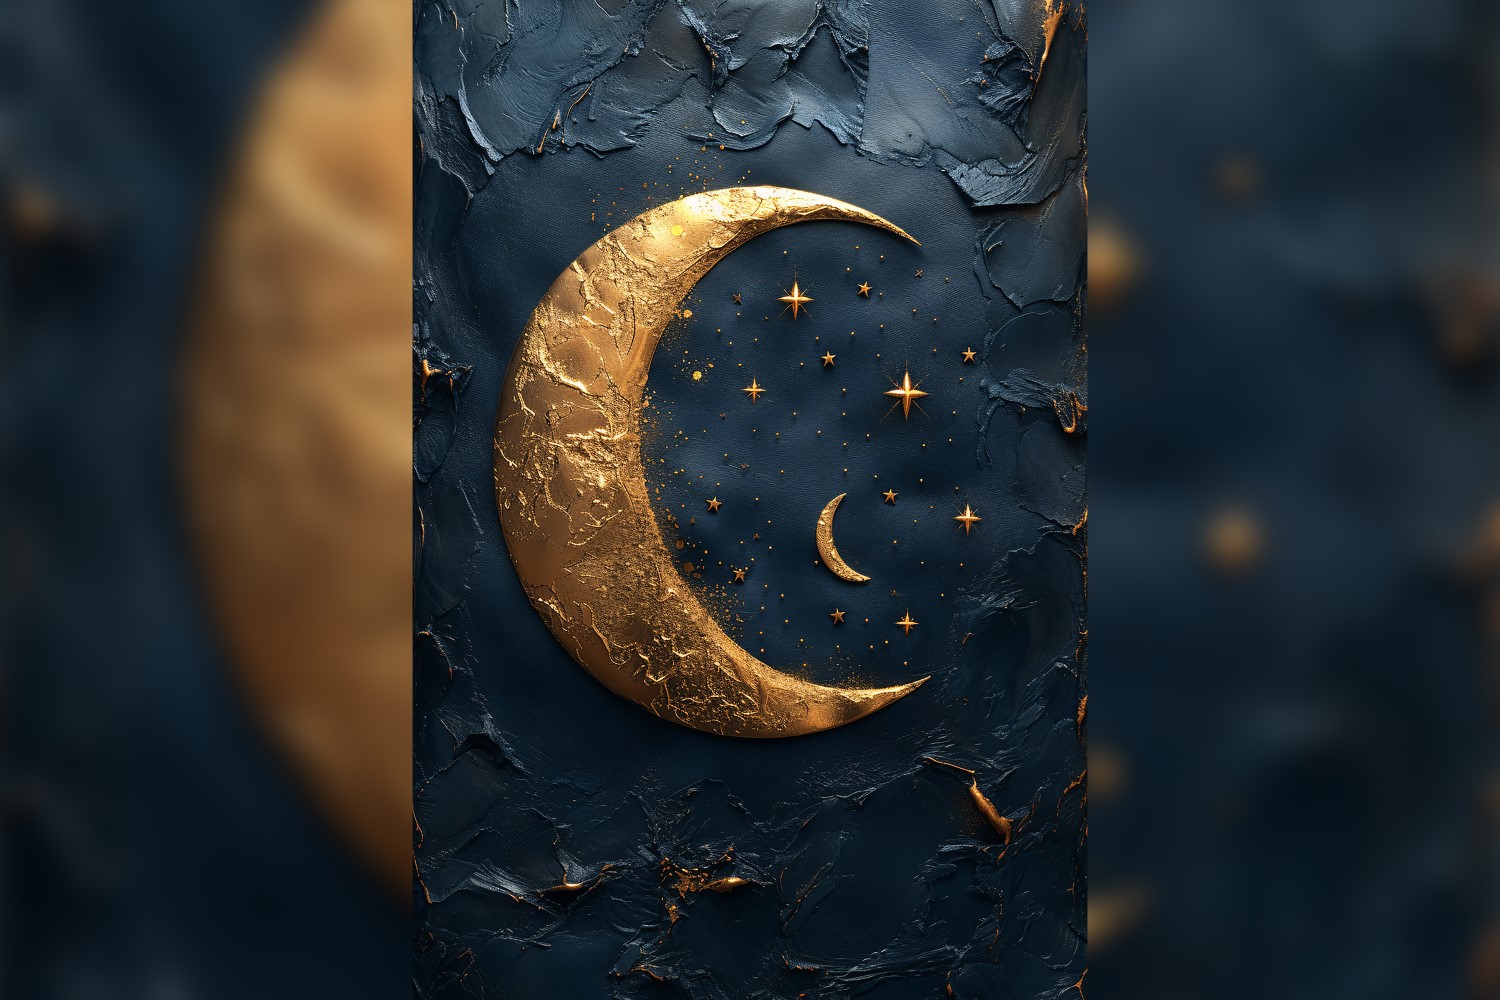 Ramadan Kareem greeting poster design with golden moon and star on the leather background 03